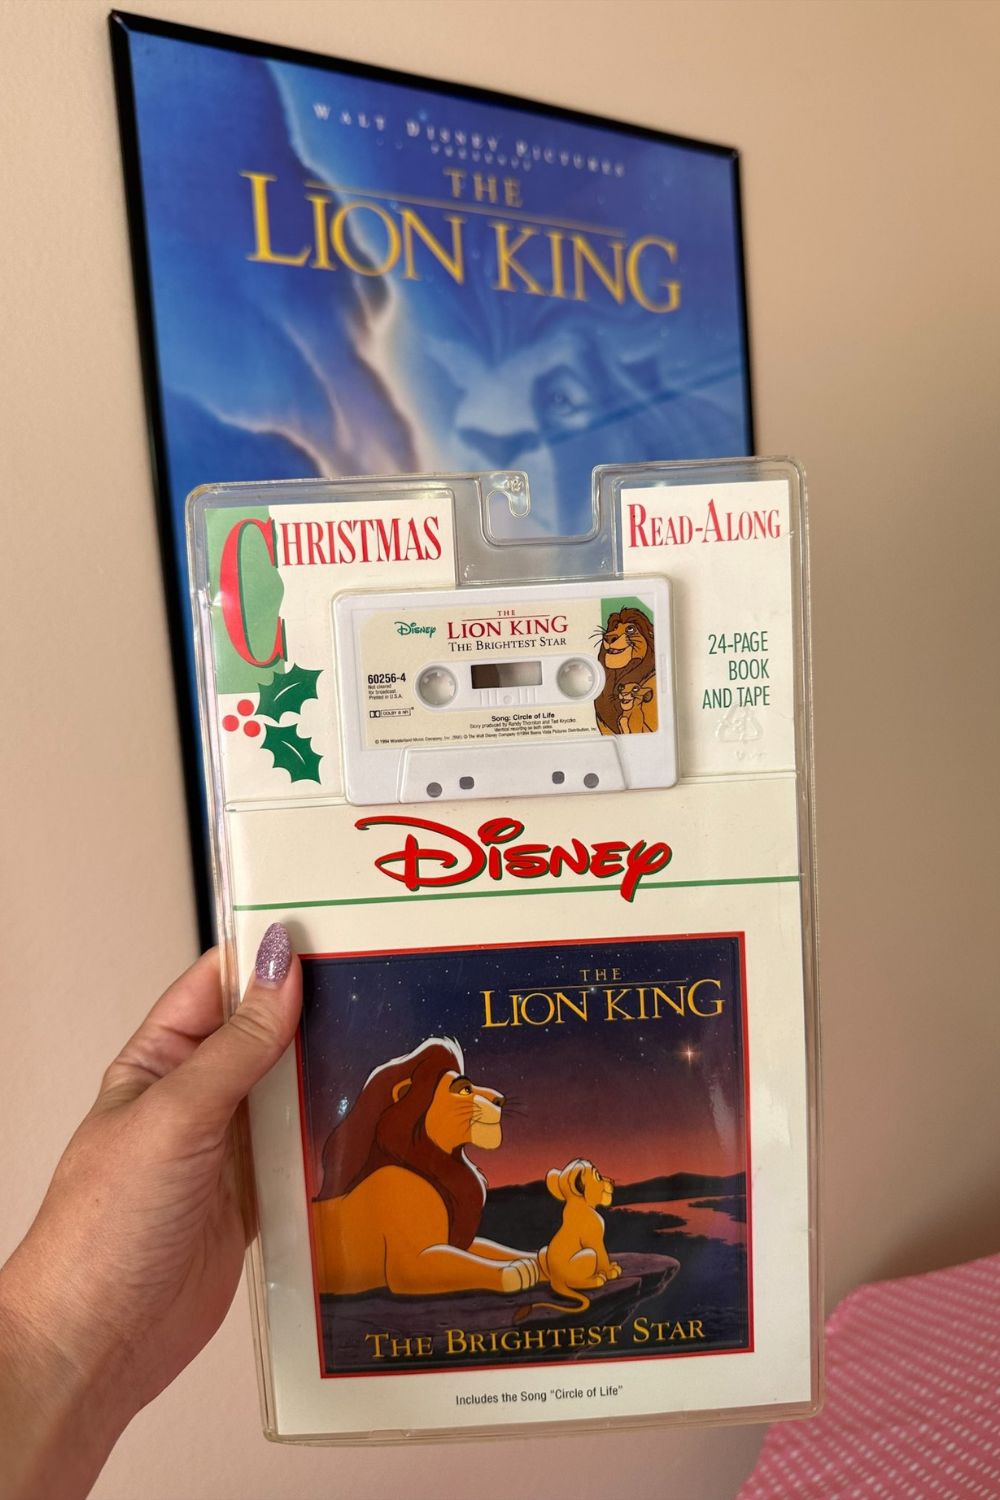 LION KING CHRISTMAS READ-ALONG "THE BRIGHTEST STAR" CASSETTE*